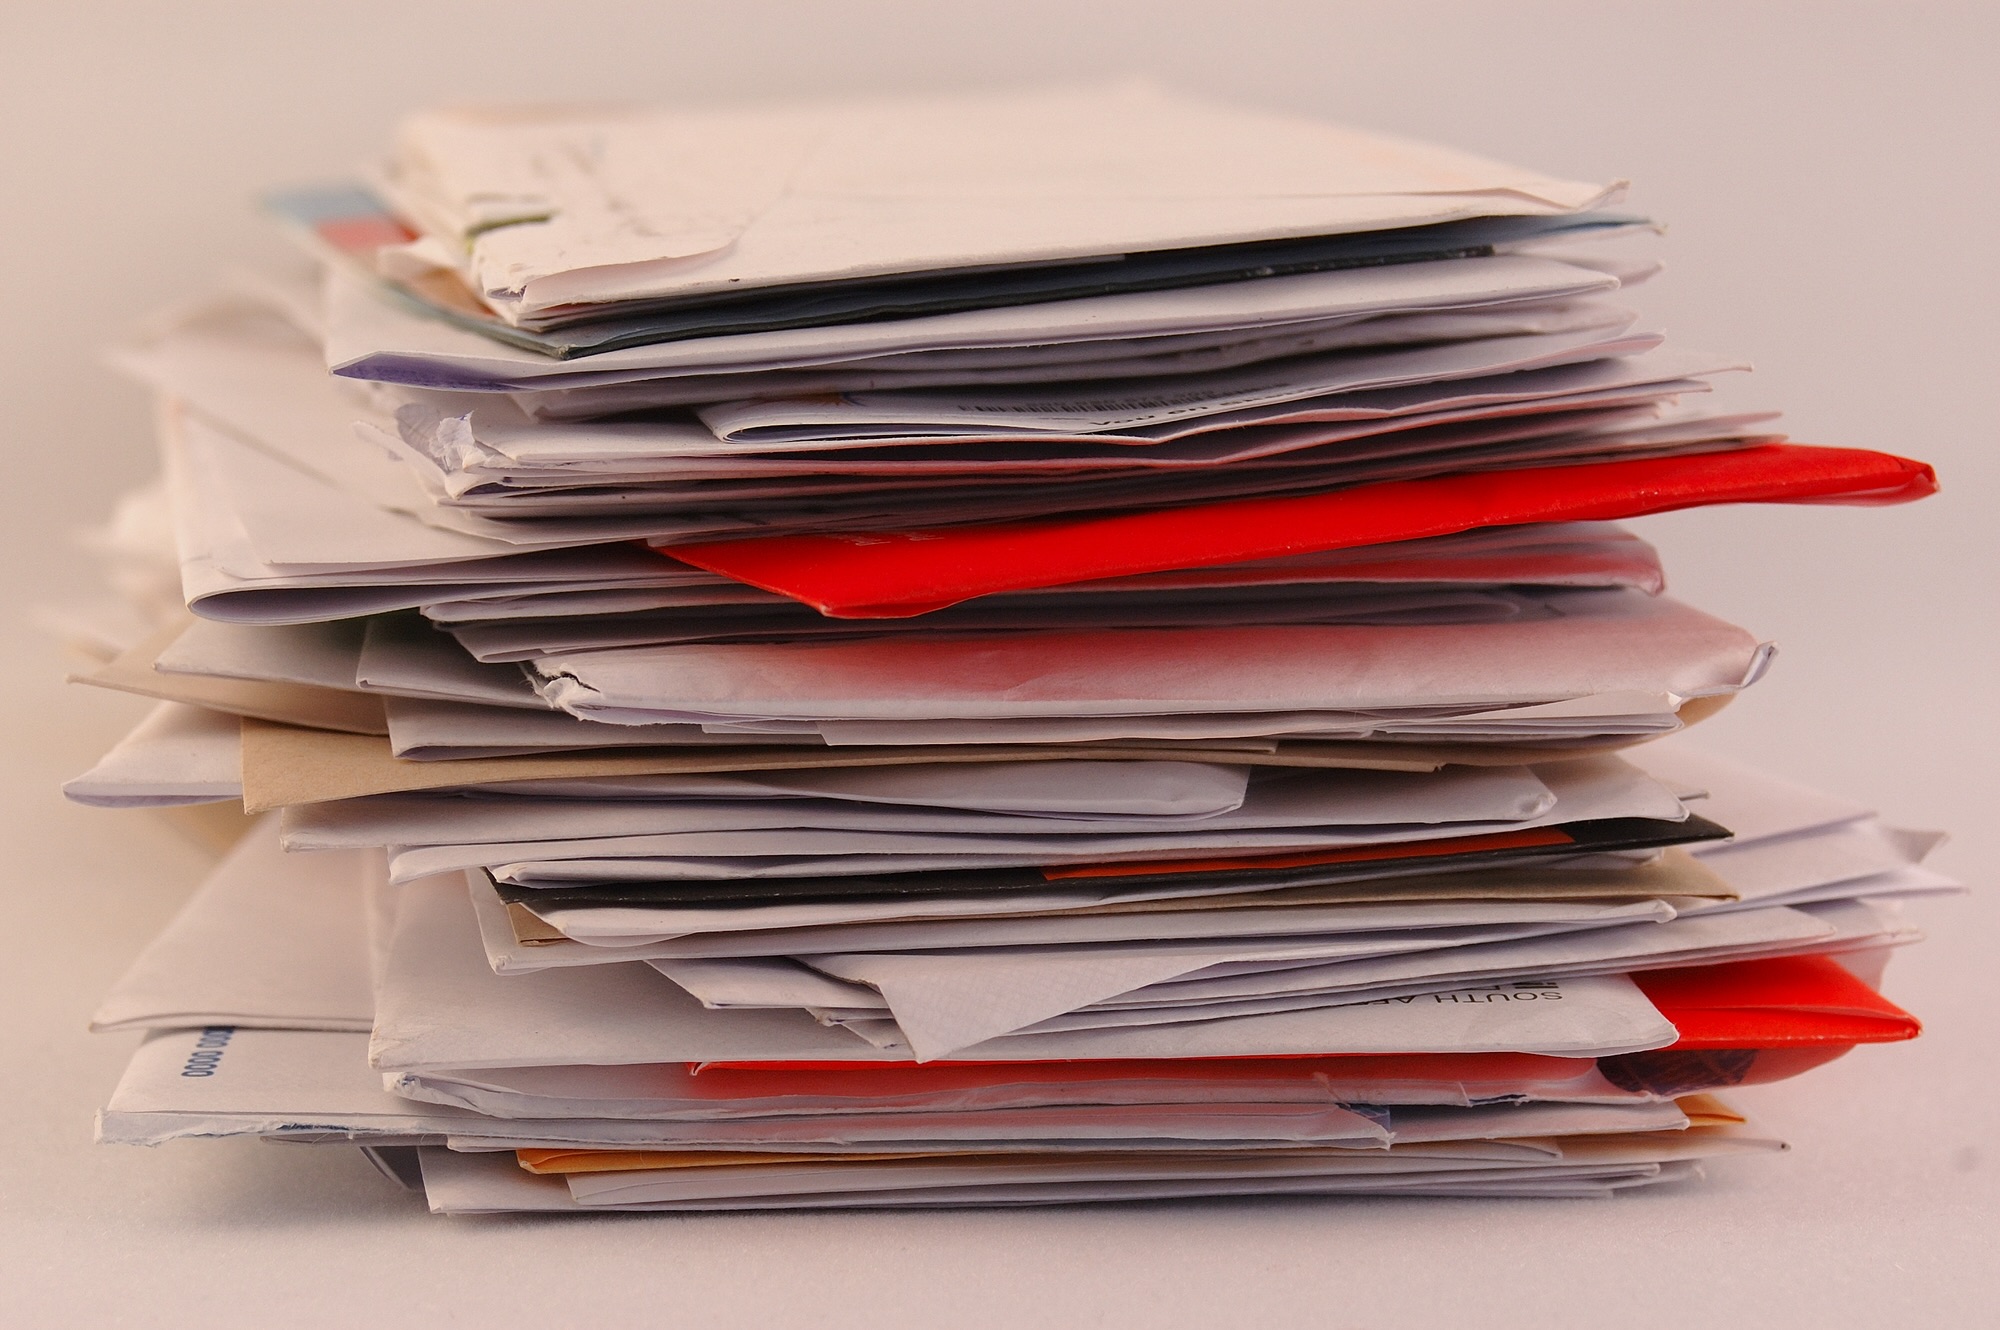 De-Clutter… Opt Out of Junk Mail for the Planet